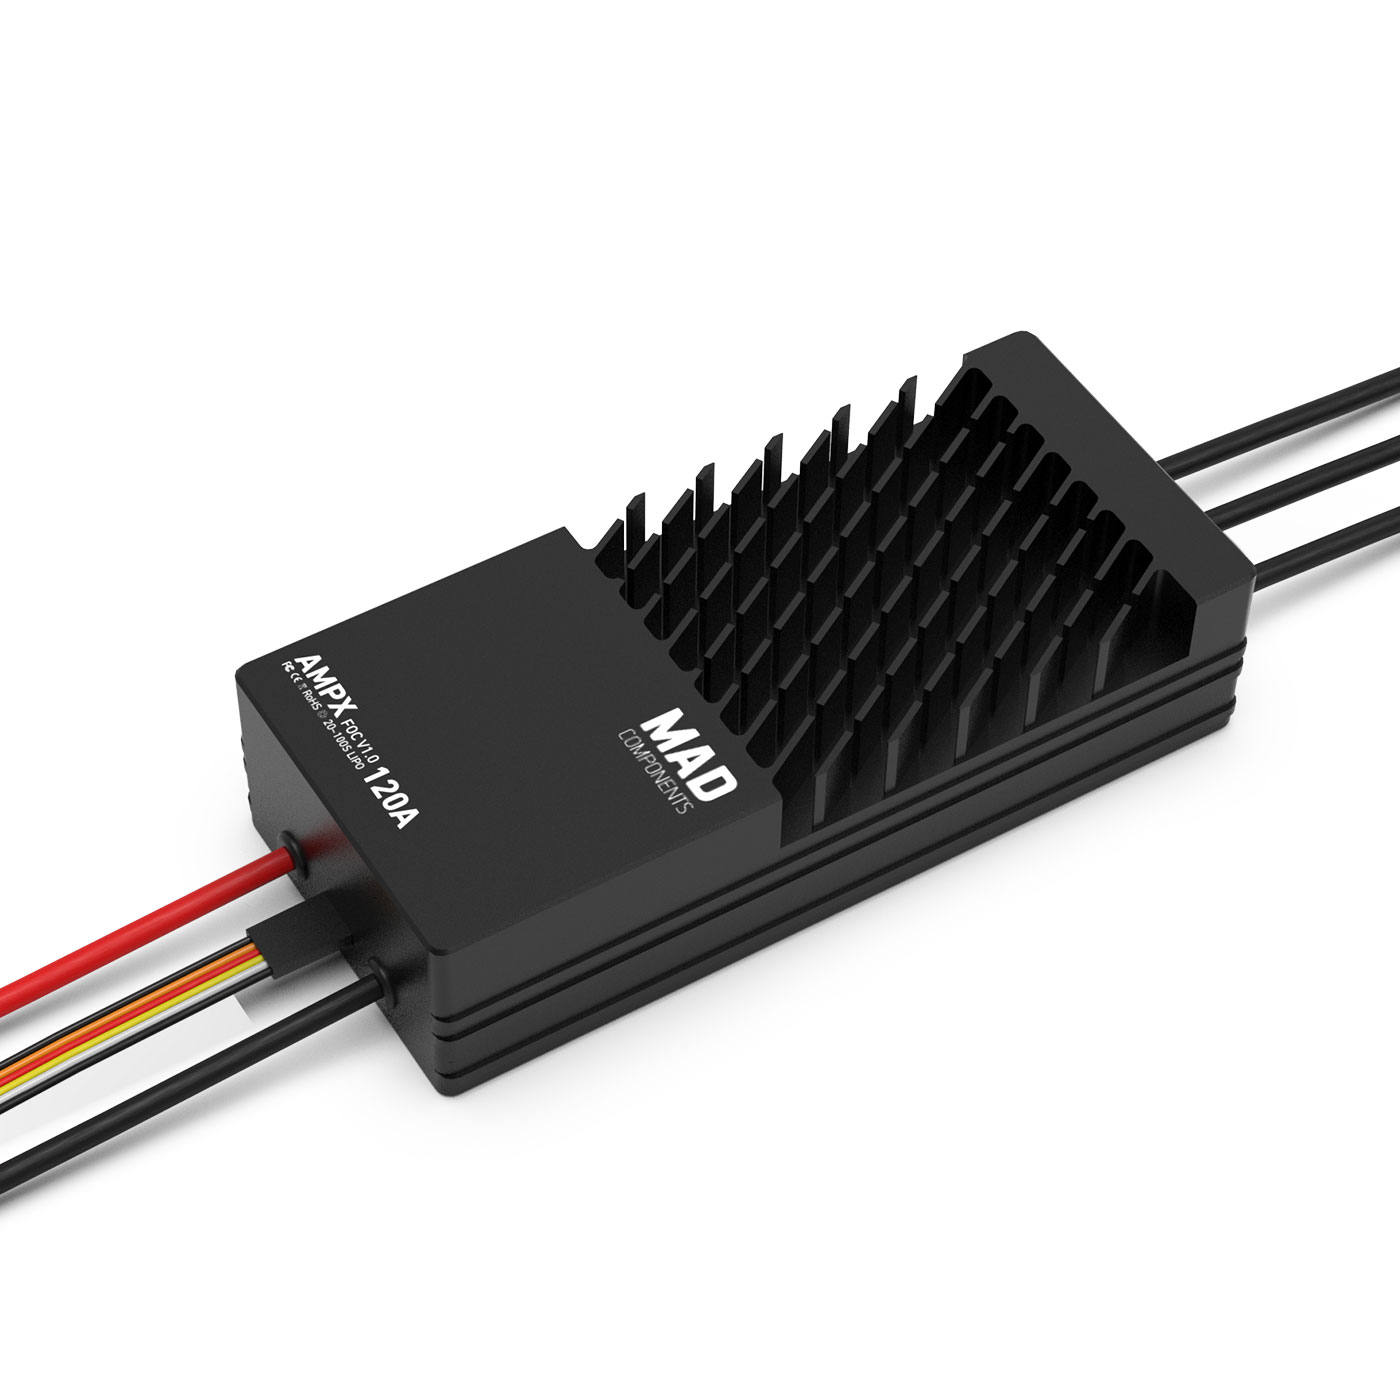 120A 6-14S FOC ESC for the professional drone, multirotor turned drone arm set Powertrain